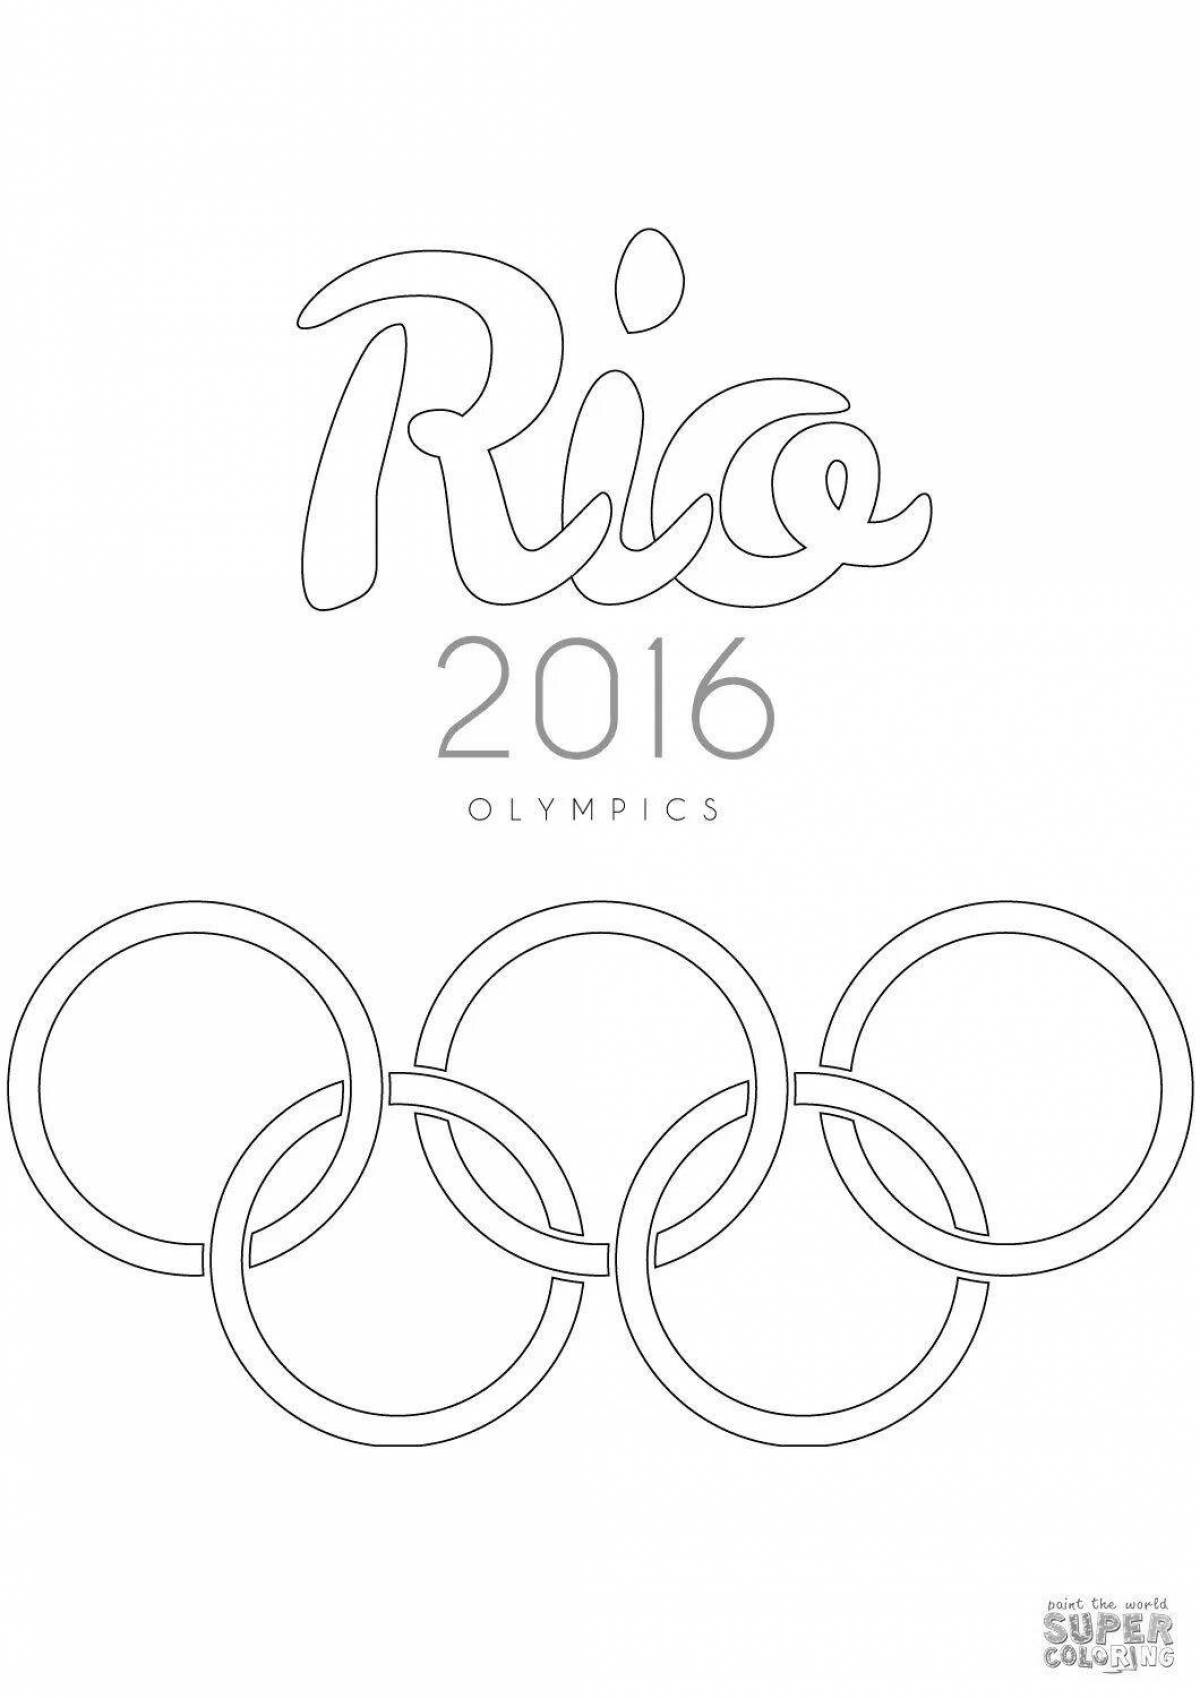 Colorful Olympic rings coloring for kids